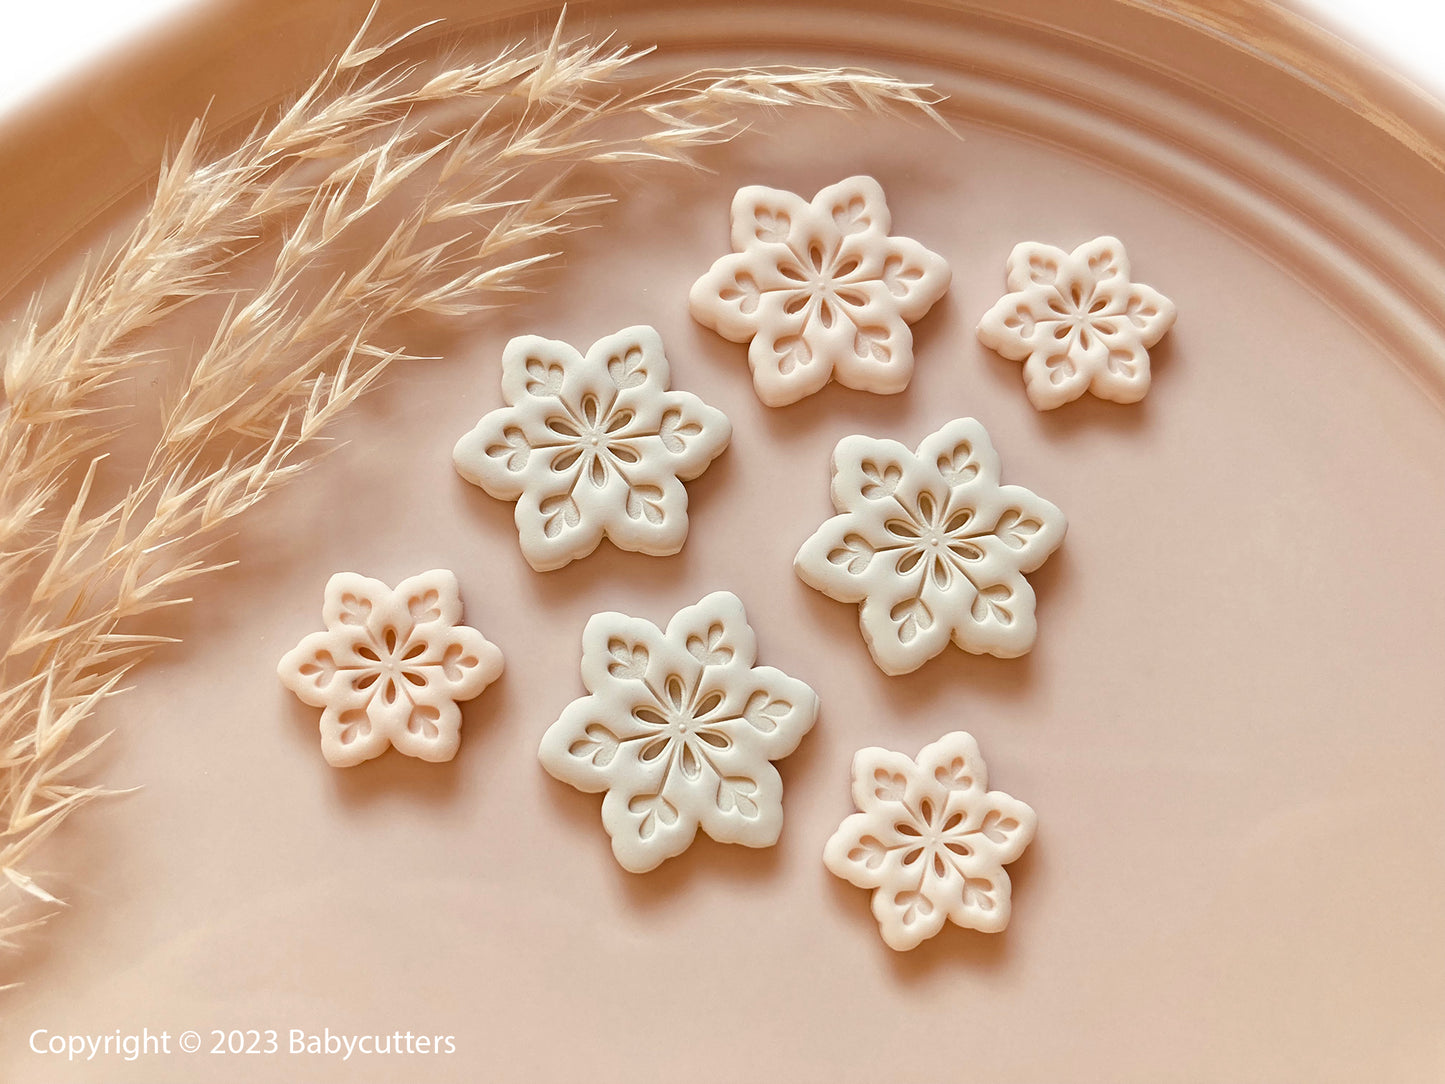 Snowflake Cutter v2 - Polymer Clay Cutter Tools